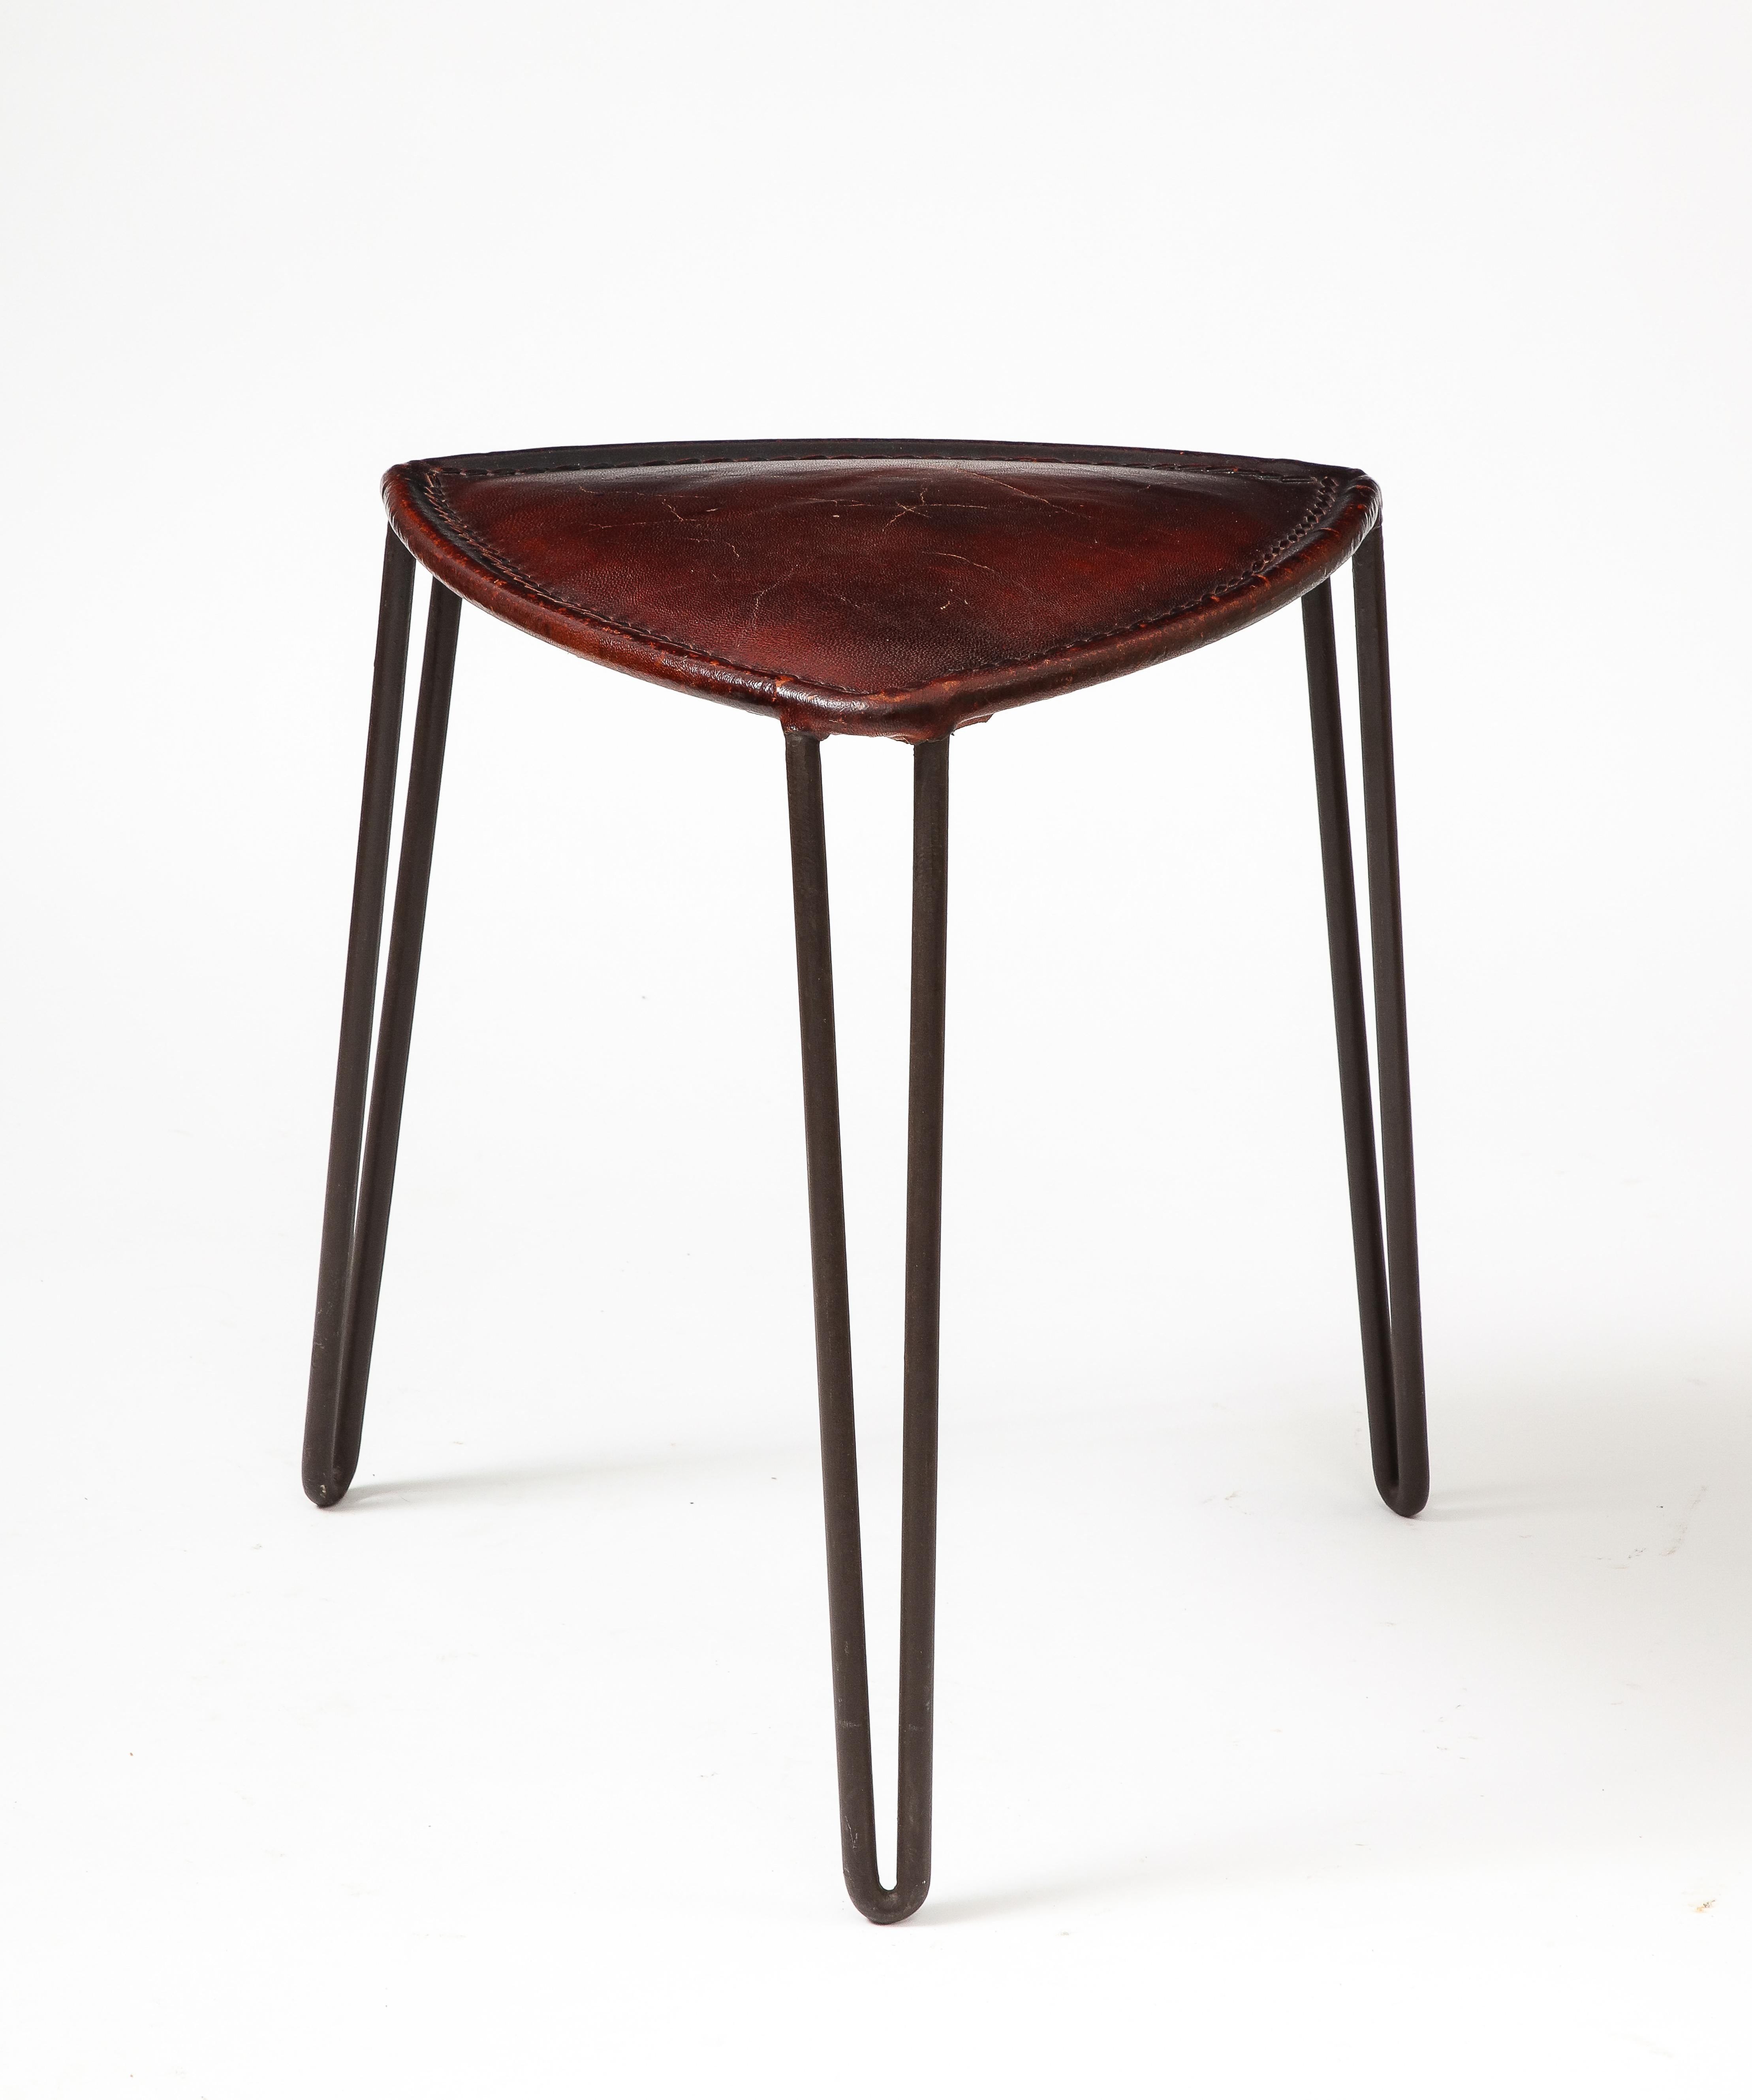 French Leather and Metal Stool, France, c. 1950 For Sale